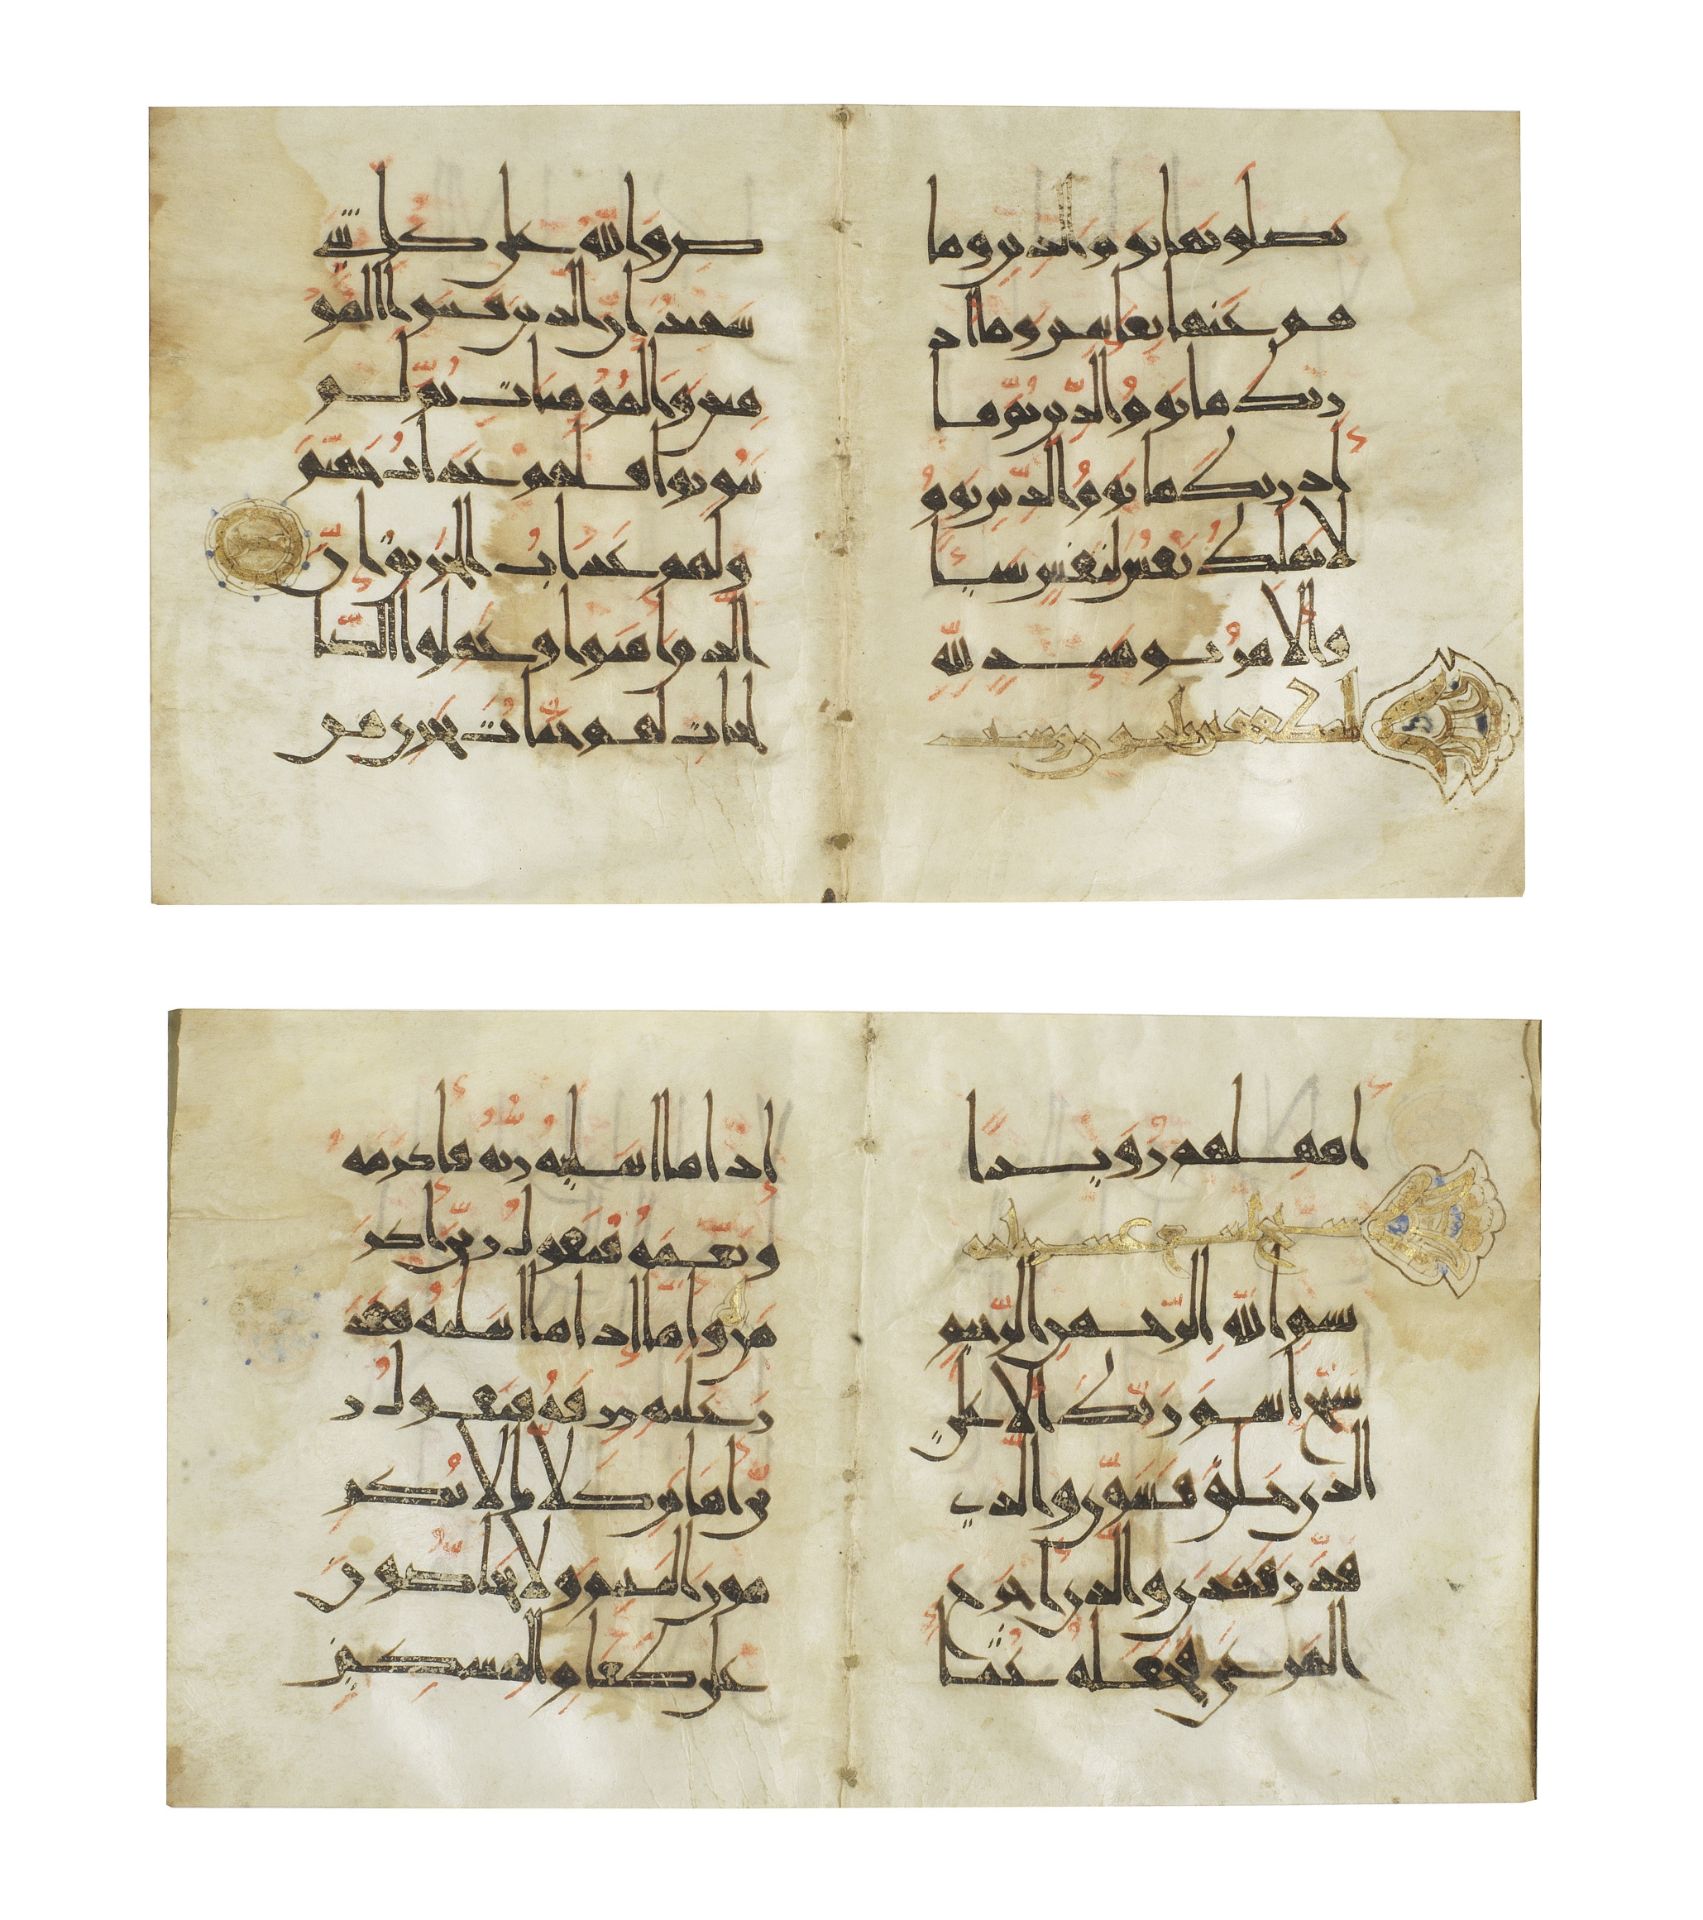 Two bifolia from a manuscript of the Qur'an written in Eastern kufic script on vellum Persia or M...